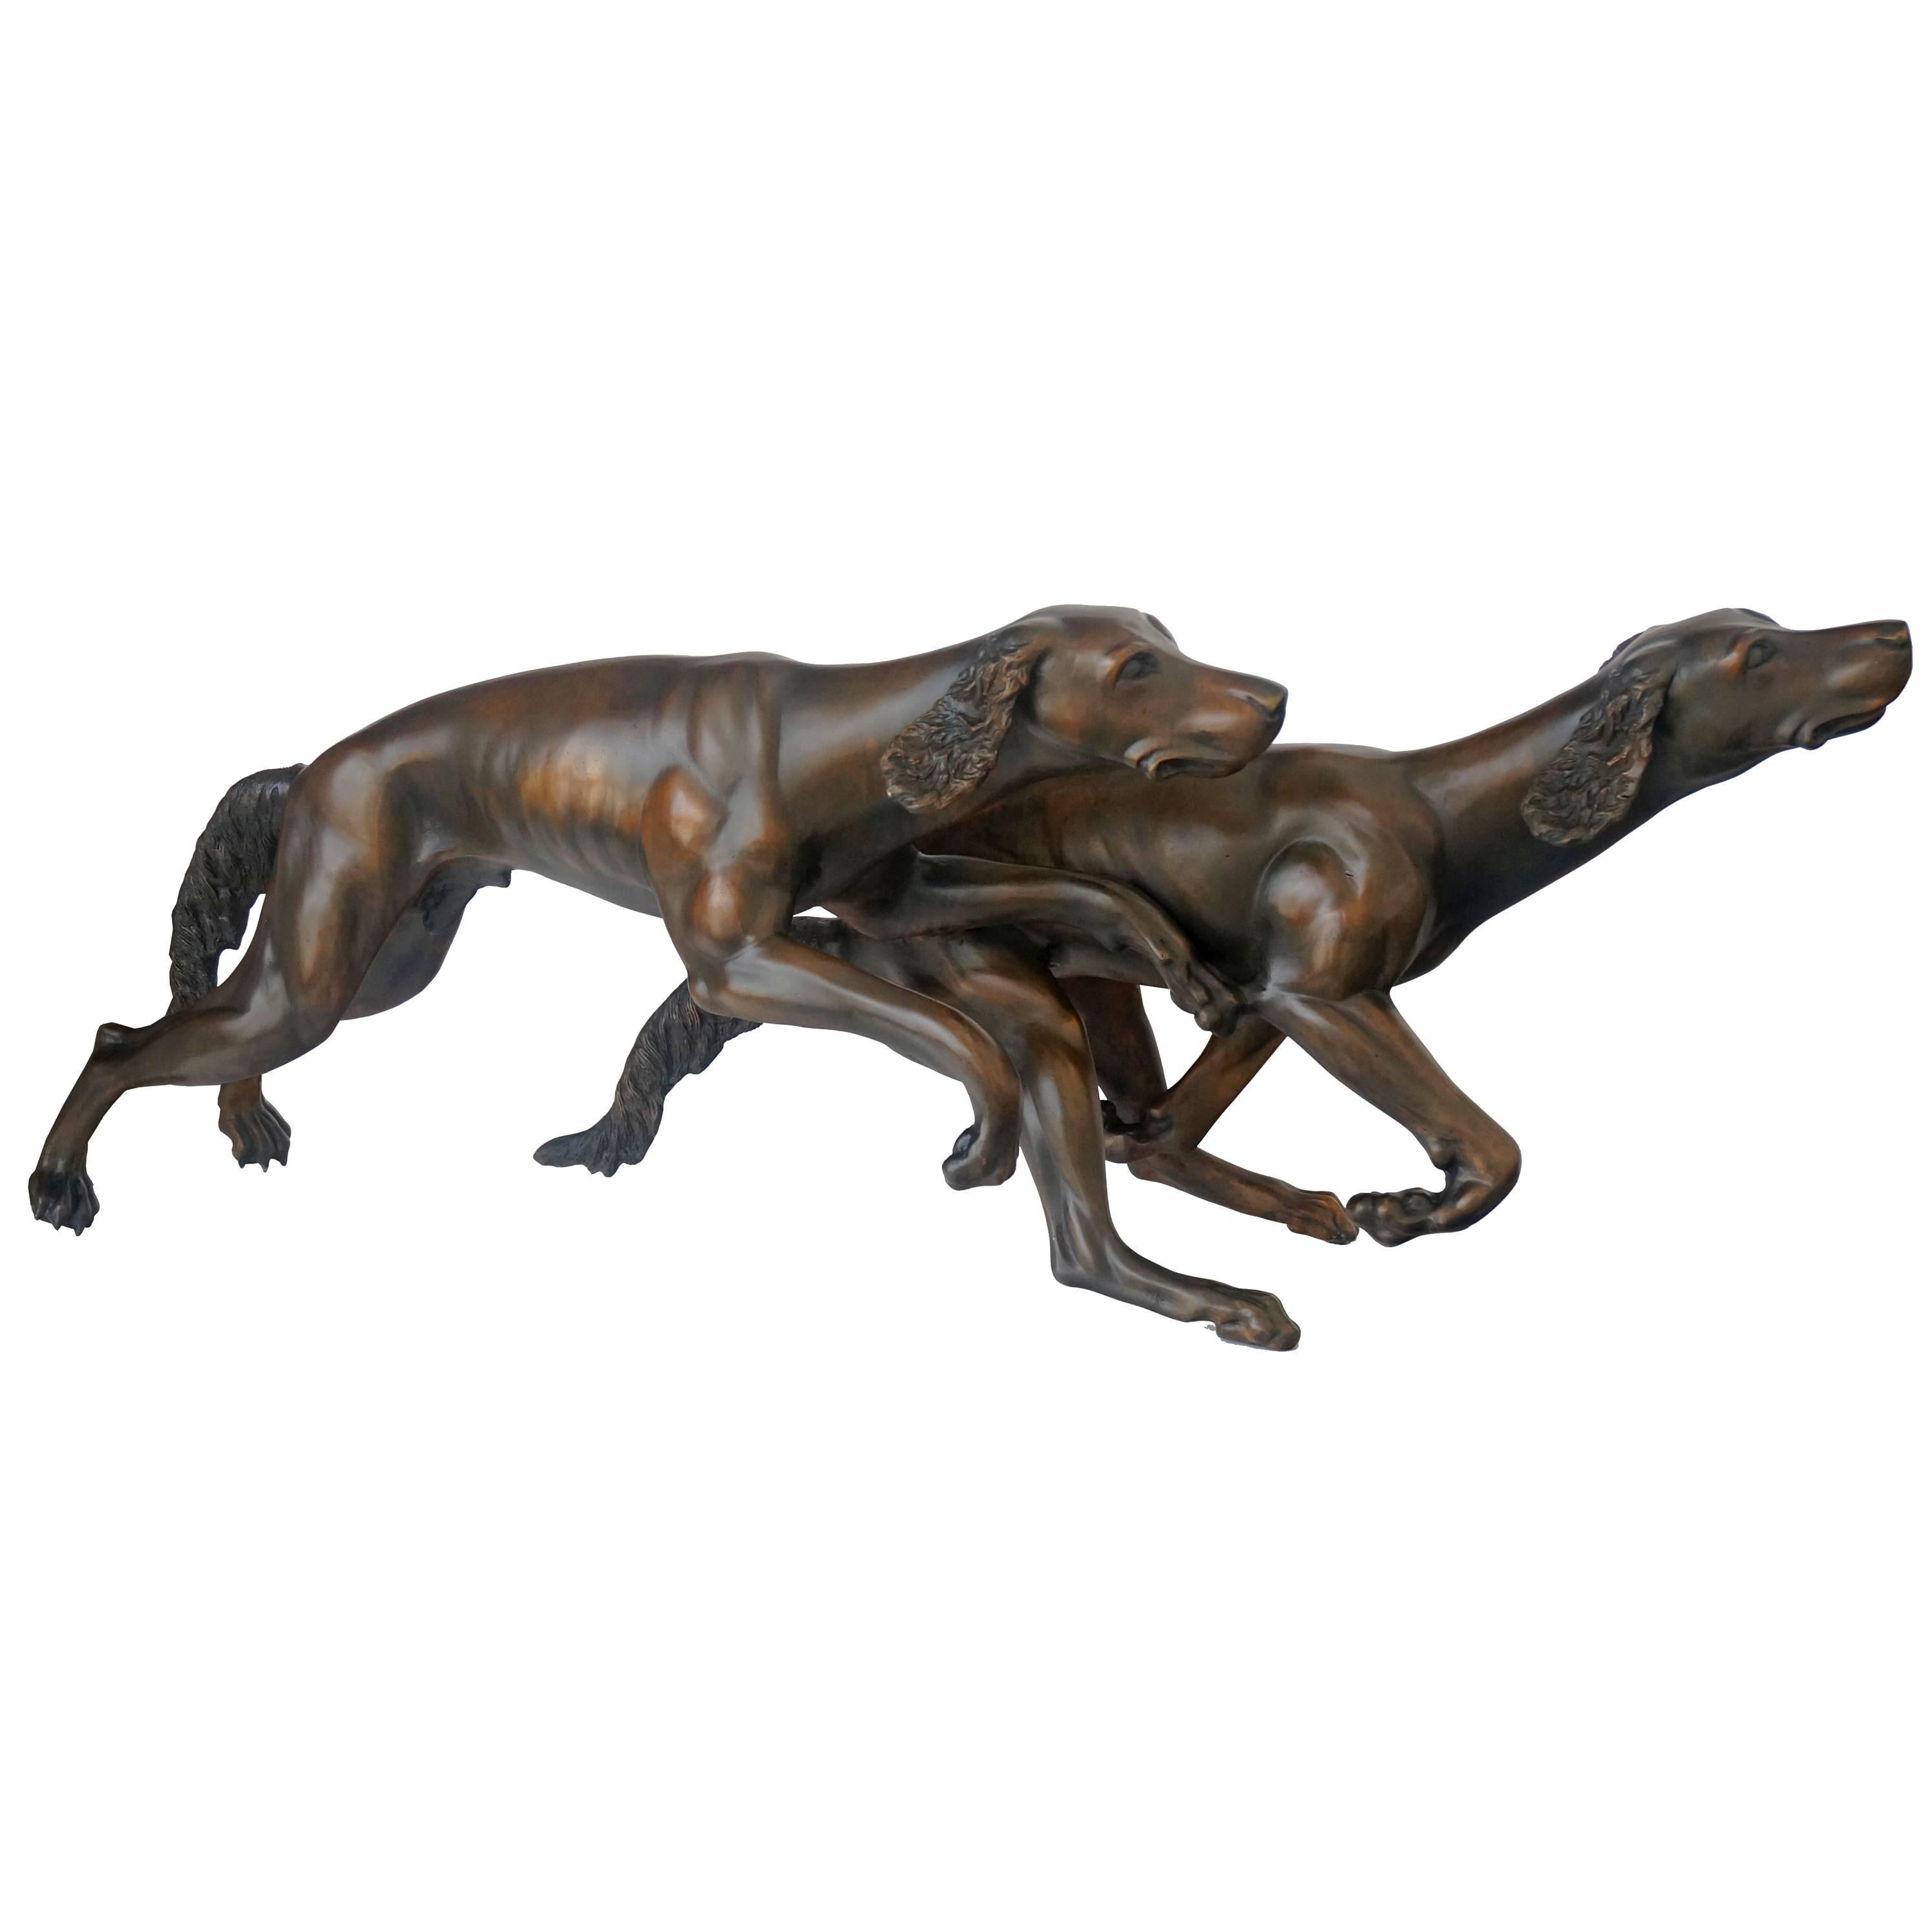 This set of two cast-bronze lifesize Brittany spaniel sculptures will make the perfect addition to your garden or perhaps entrance. The sculptor has captured the Brittany in full range of motion as they seem to glide in unison across the imaginary